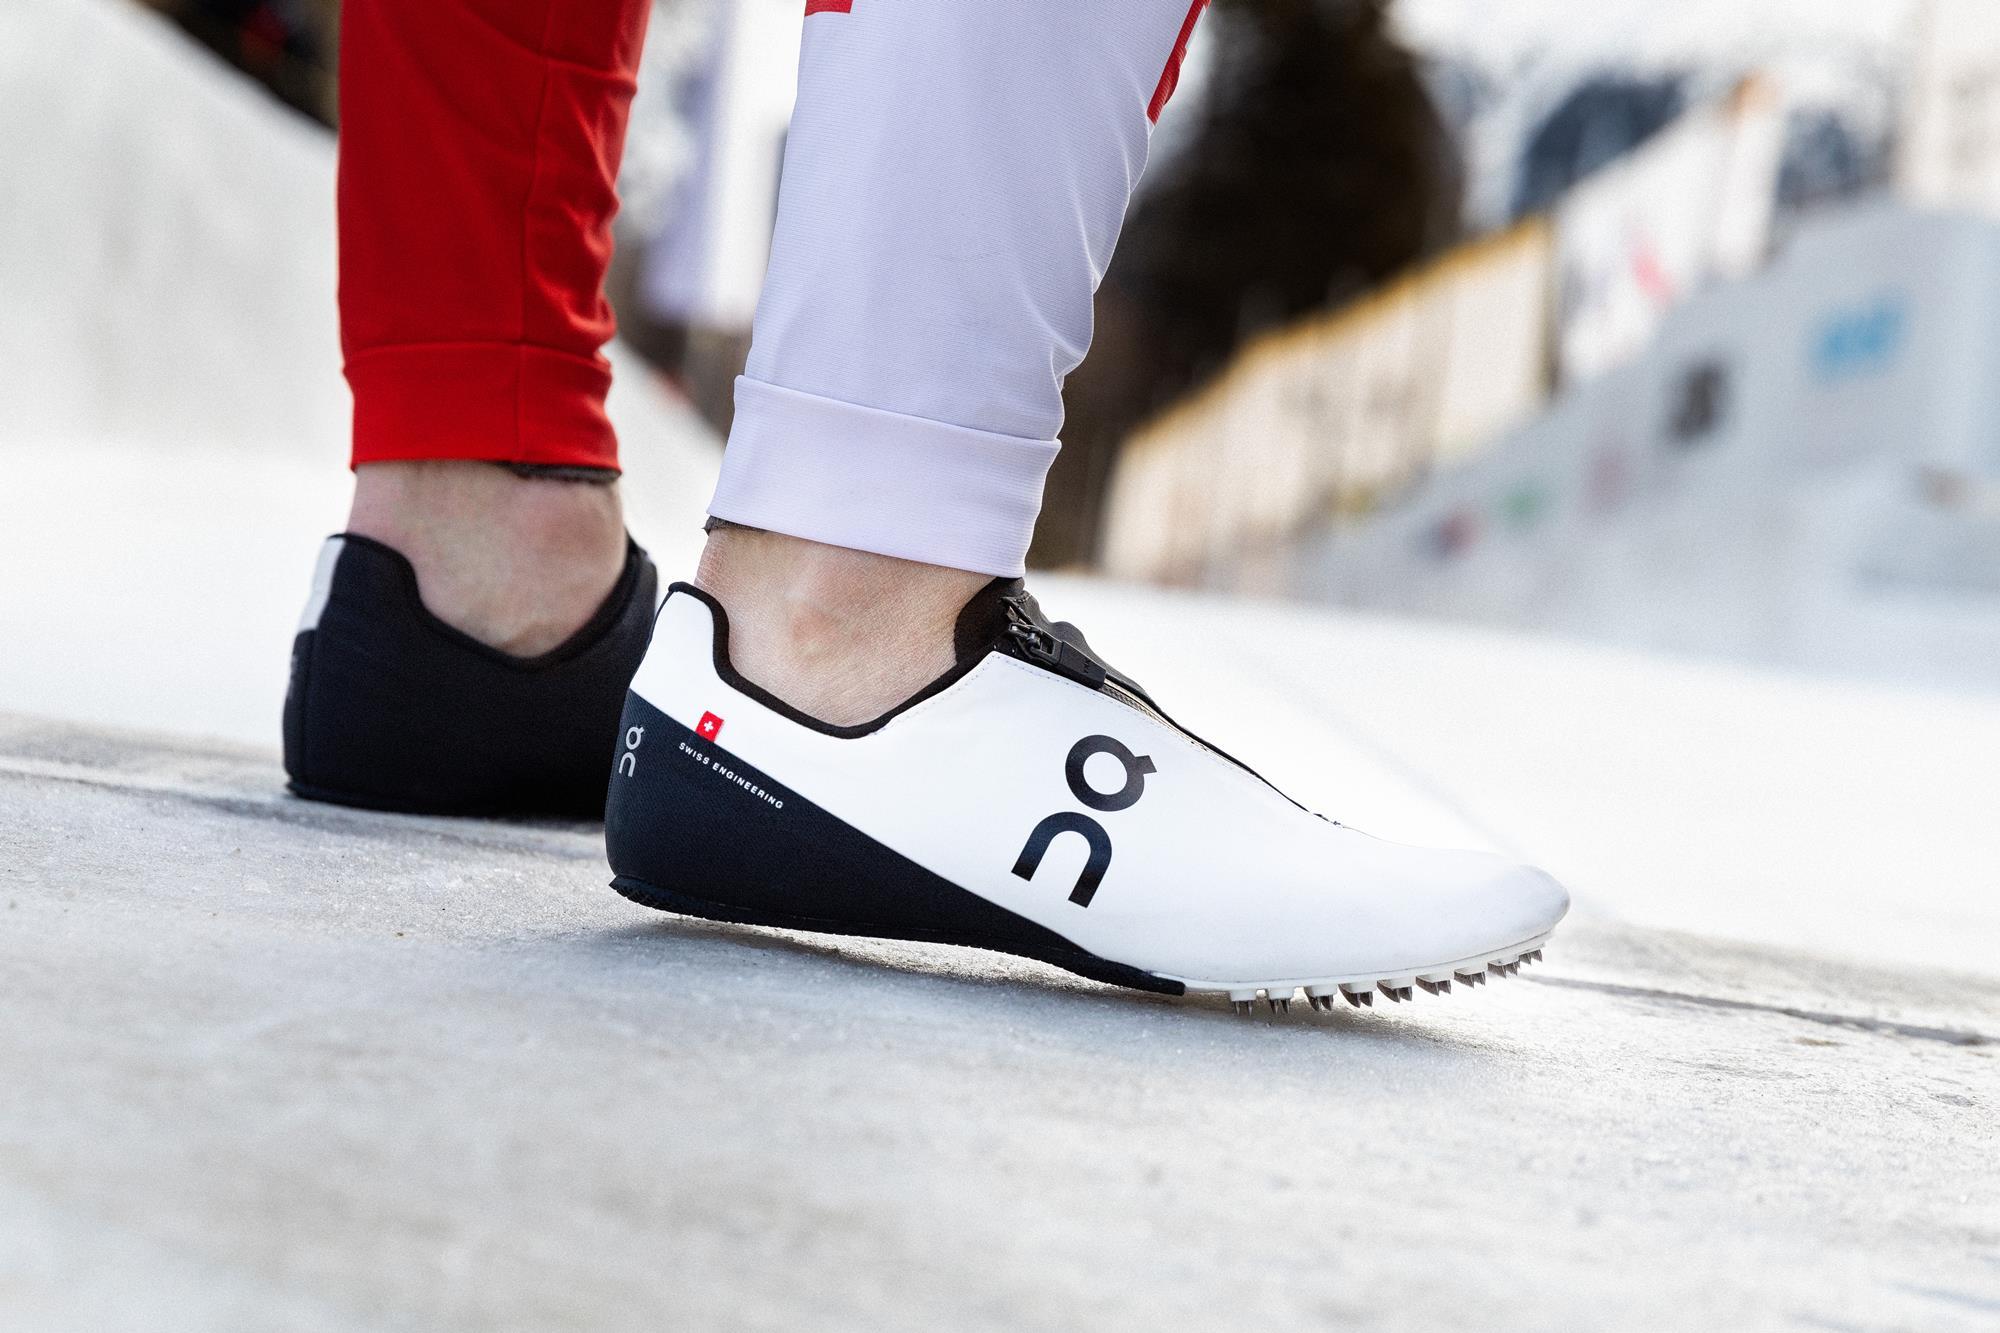 itálico solitario Resbaladizo On outfits Swiss Olympians – and bobsledders – in Beijing | News briefs |  Sporting Goods Intelligence